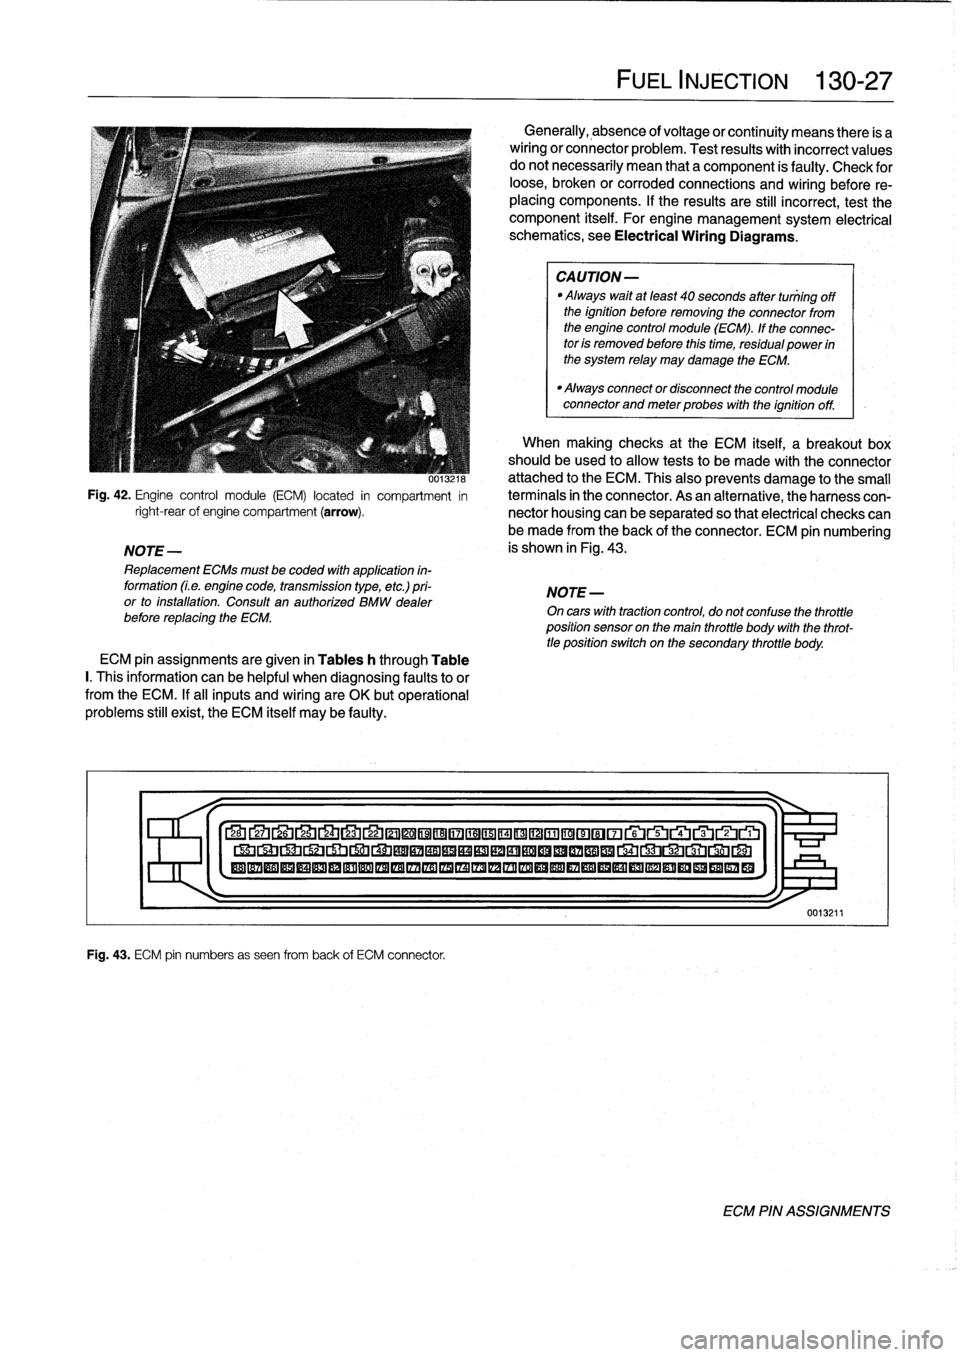 BMW M3 1993 E36 Workshop Manual 
0013ZIM
Fig
.
42
.
Engine
control
module
(ECM)
located
in
compartment
in
right-rearof
engine
compartment
(arrow)
.

NOTE-

Replacement
ECMs
must
be
coded
with
application
in-
formation
(Le
.
engine
c